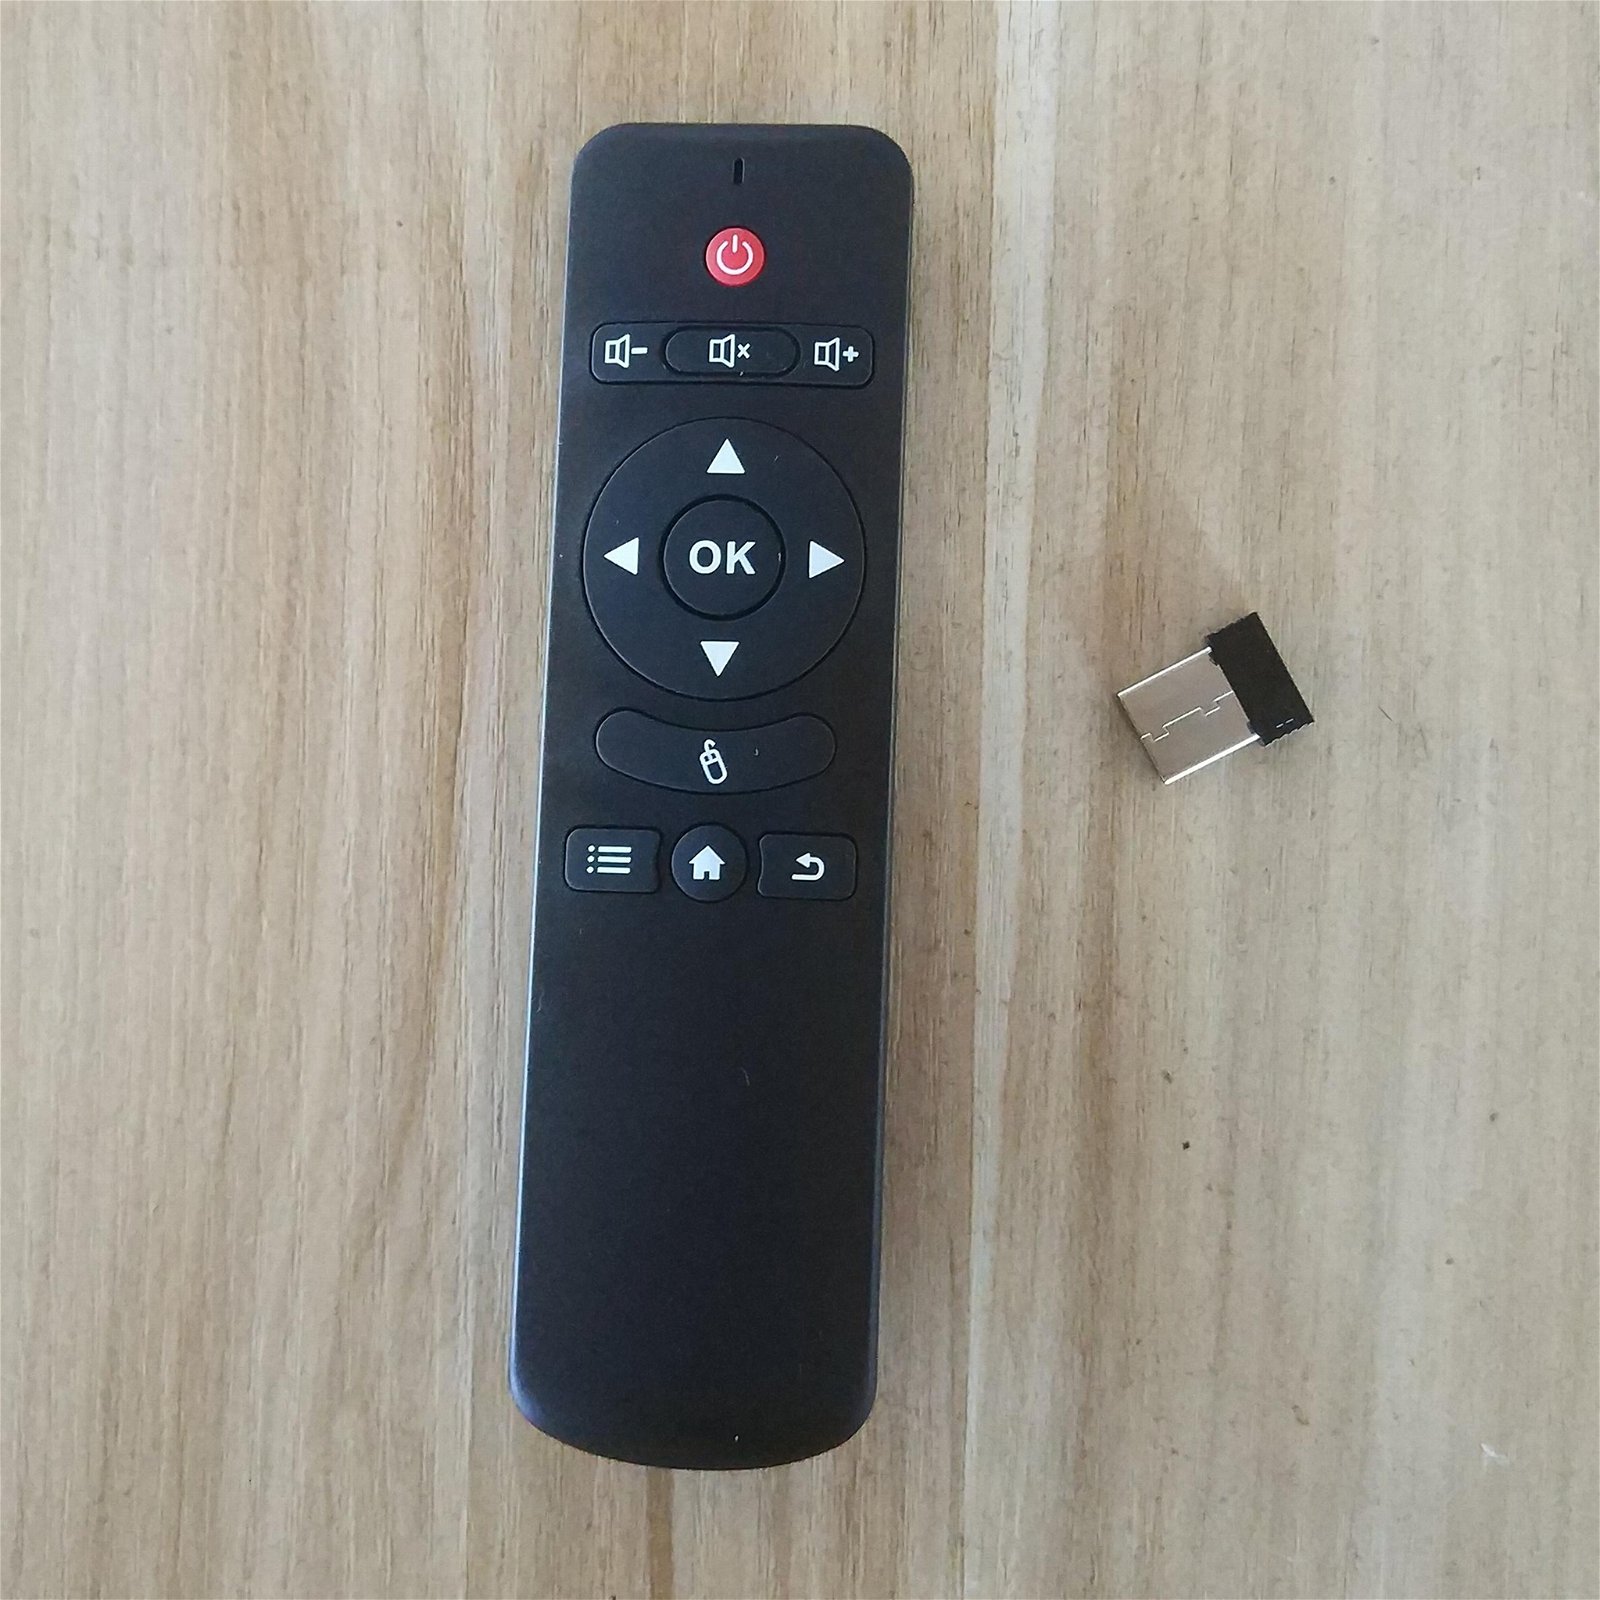 android remote control